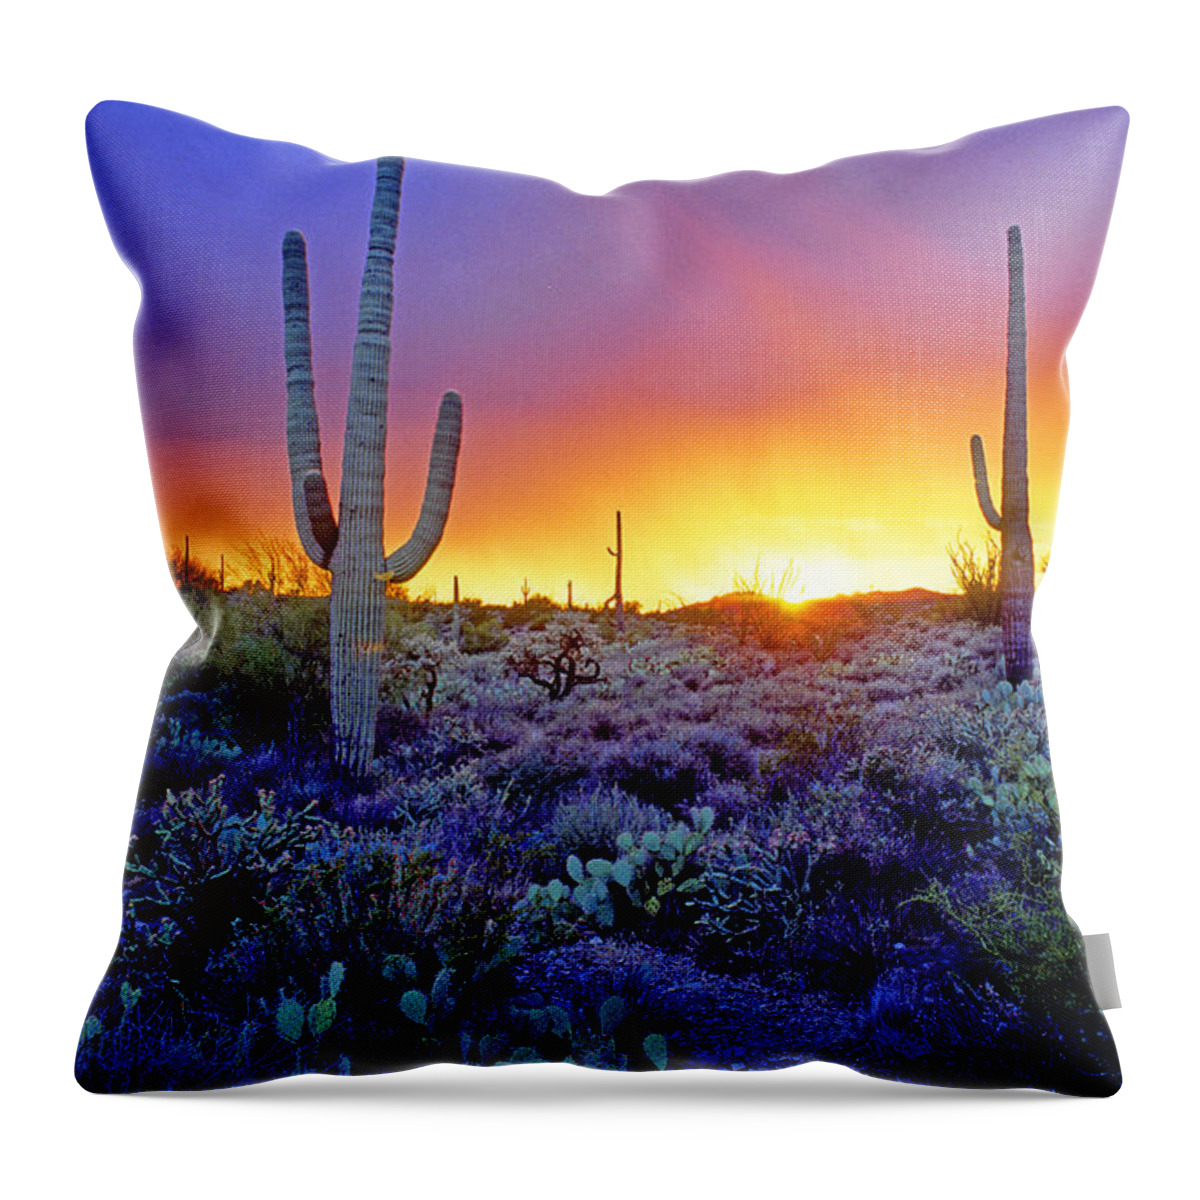 Sonoran Throw Pillow featuring the photograph Sonoran Desert At Dusk #3 by Adam Sylvester